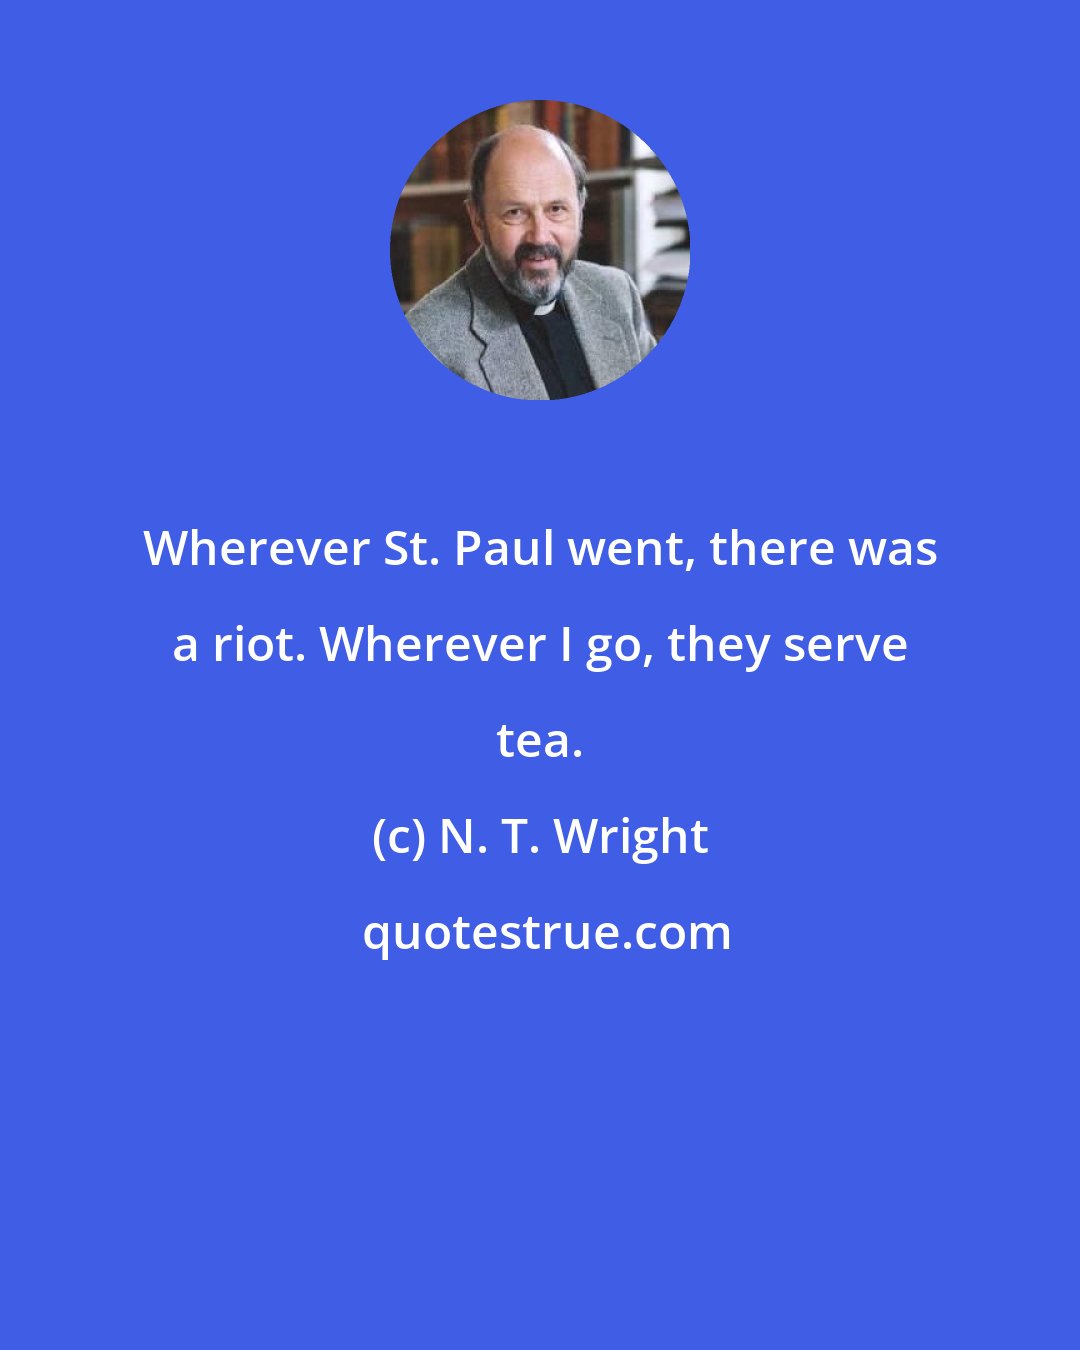 N. T. Wright: Wherever St. Paul went, there was a riot. Wherever I go, they serve tea.